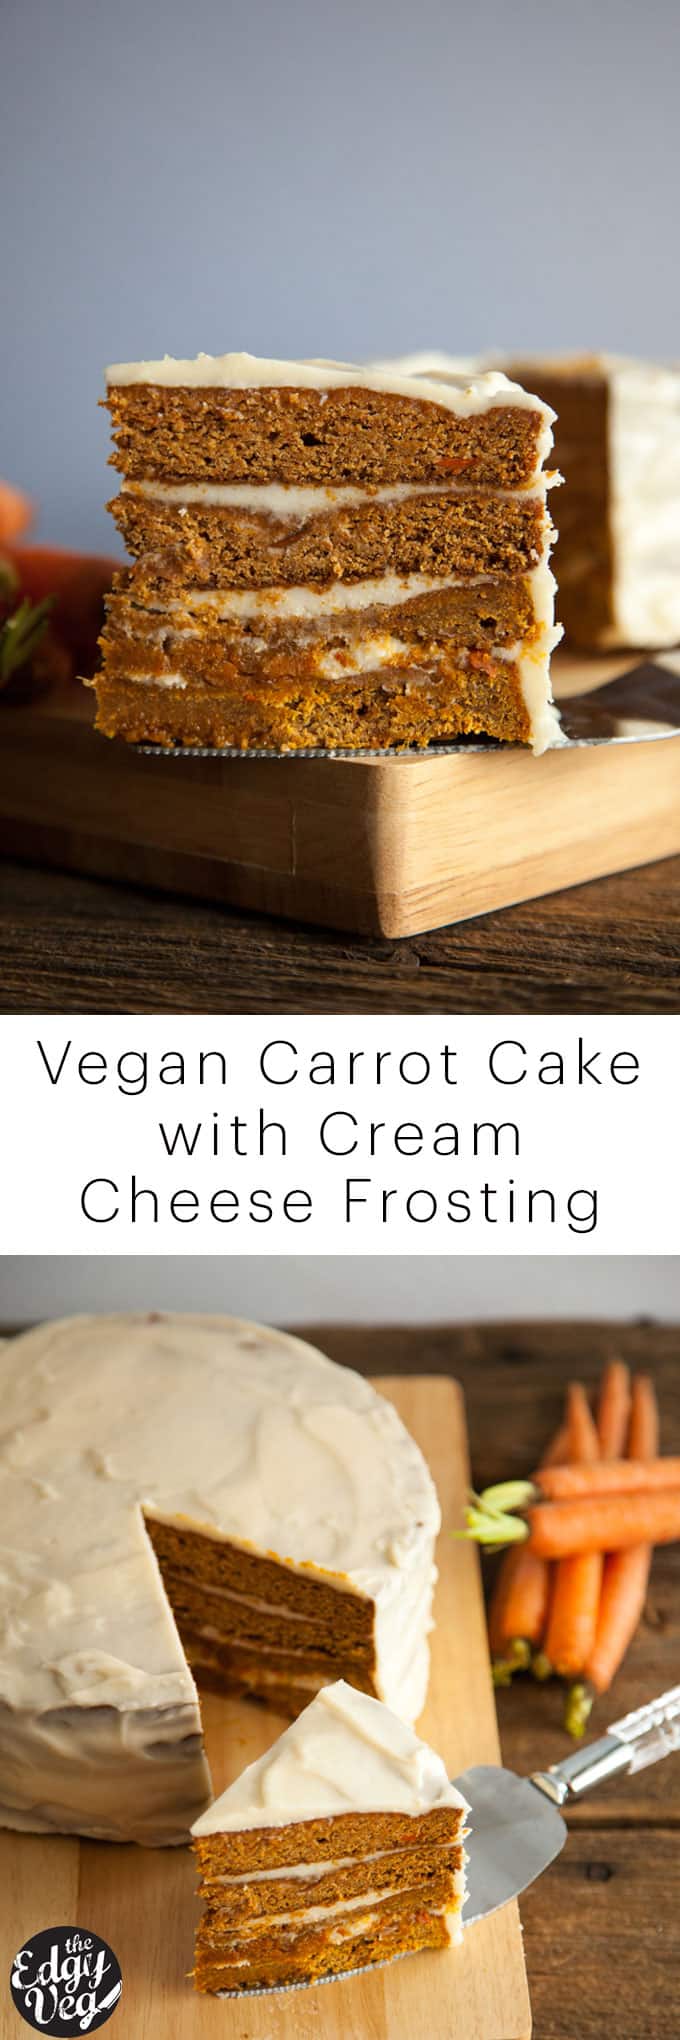 Vegan Recipe: Carrot Cake with Cream Cheese Frosting for Easter